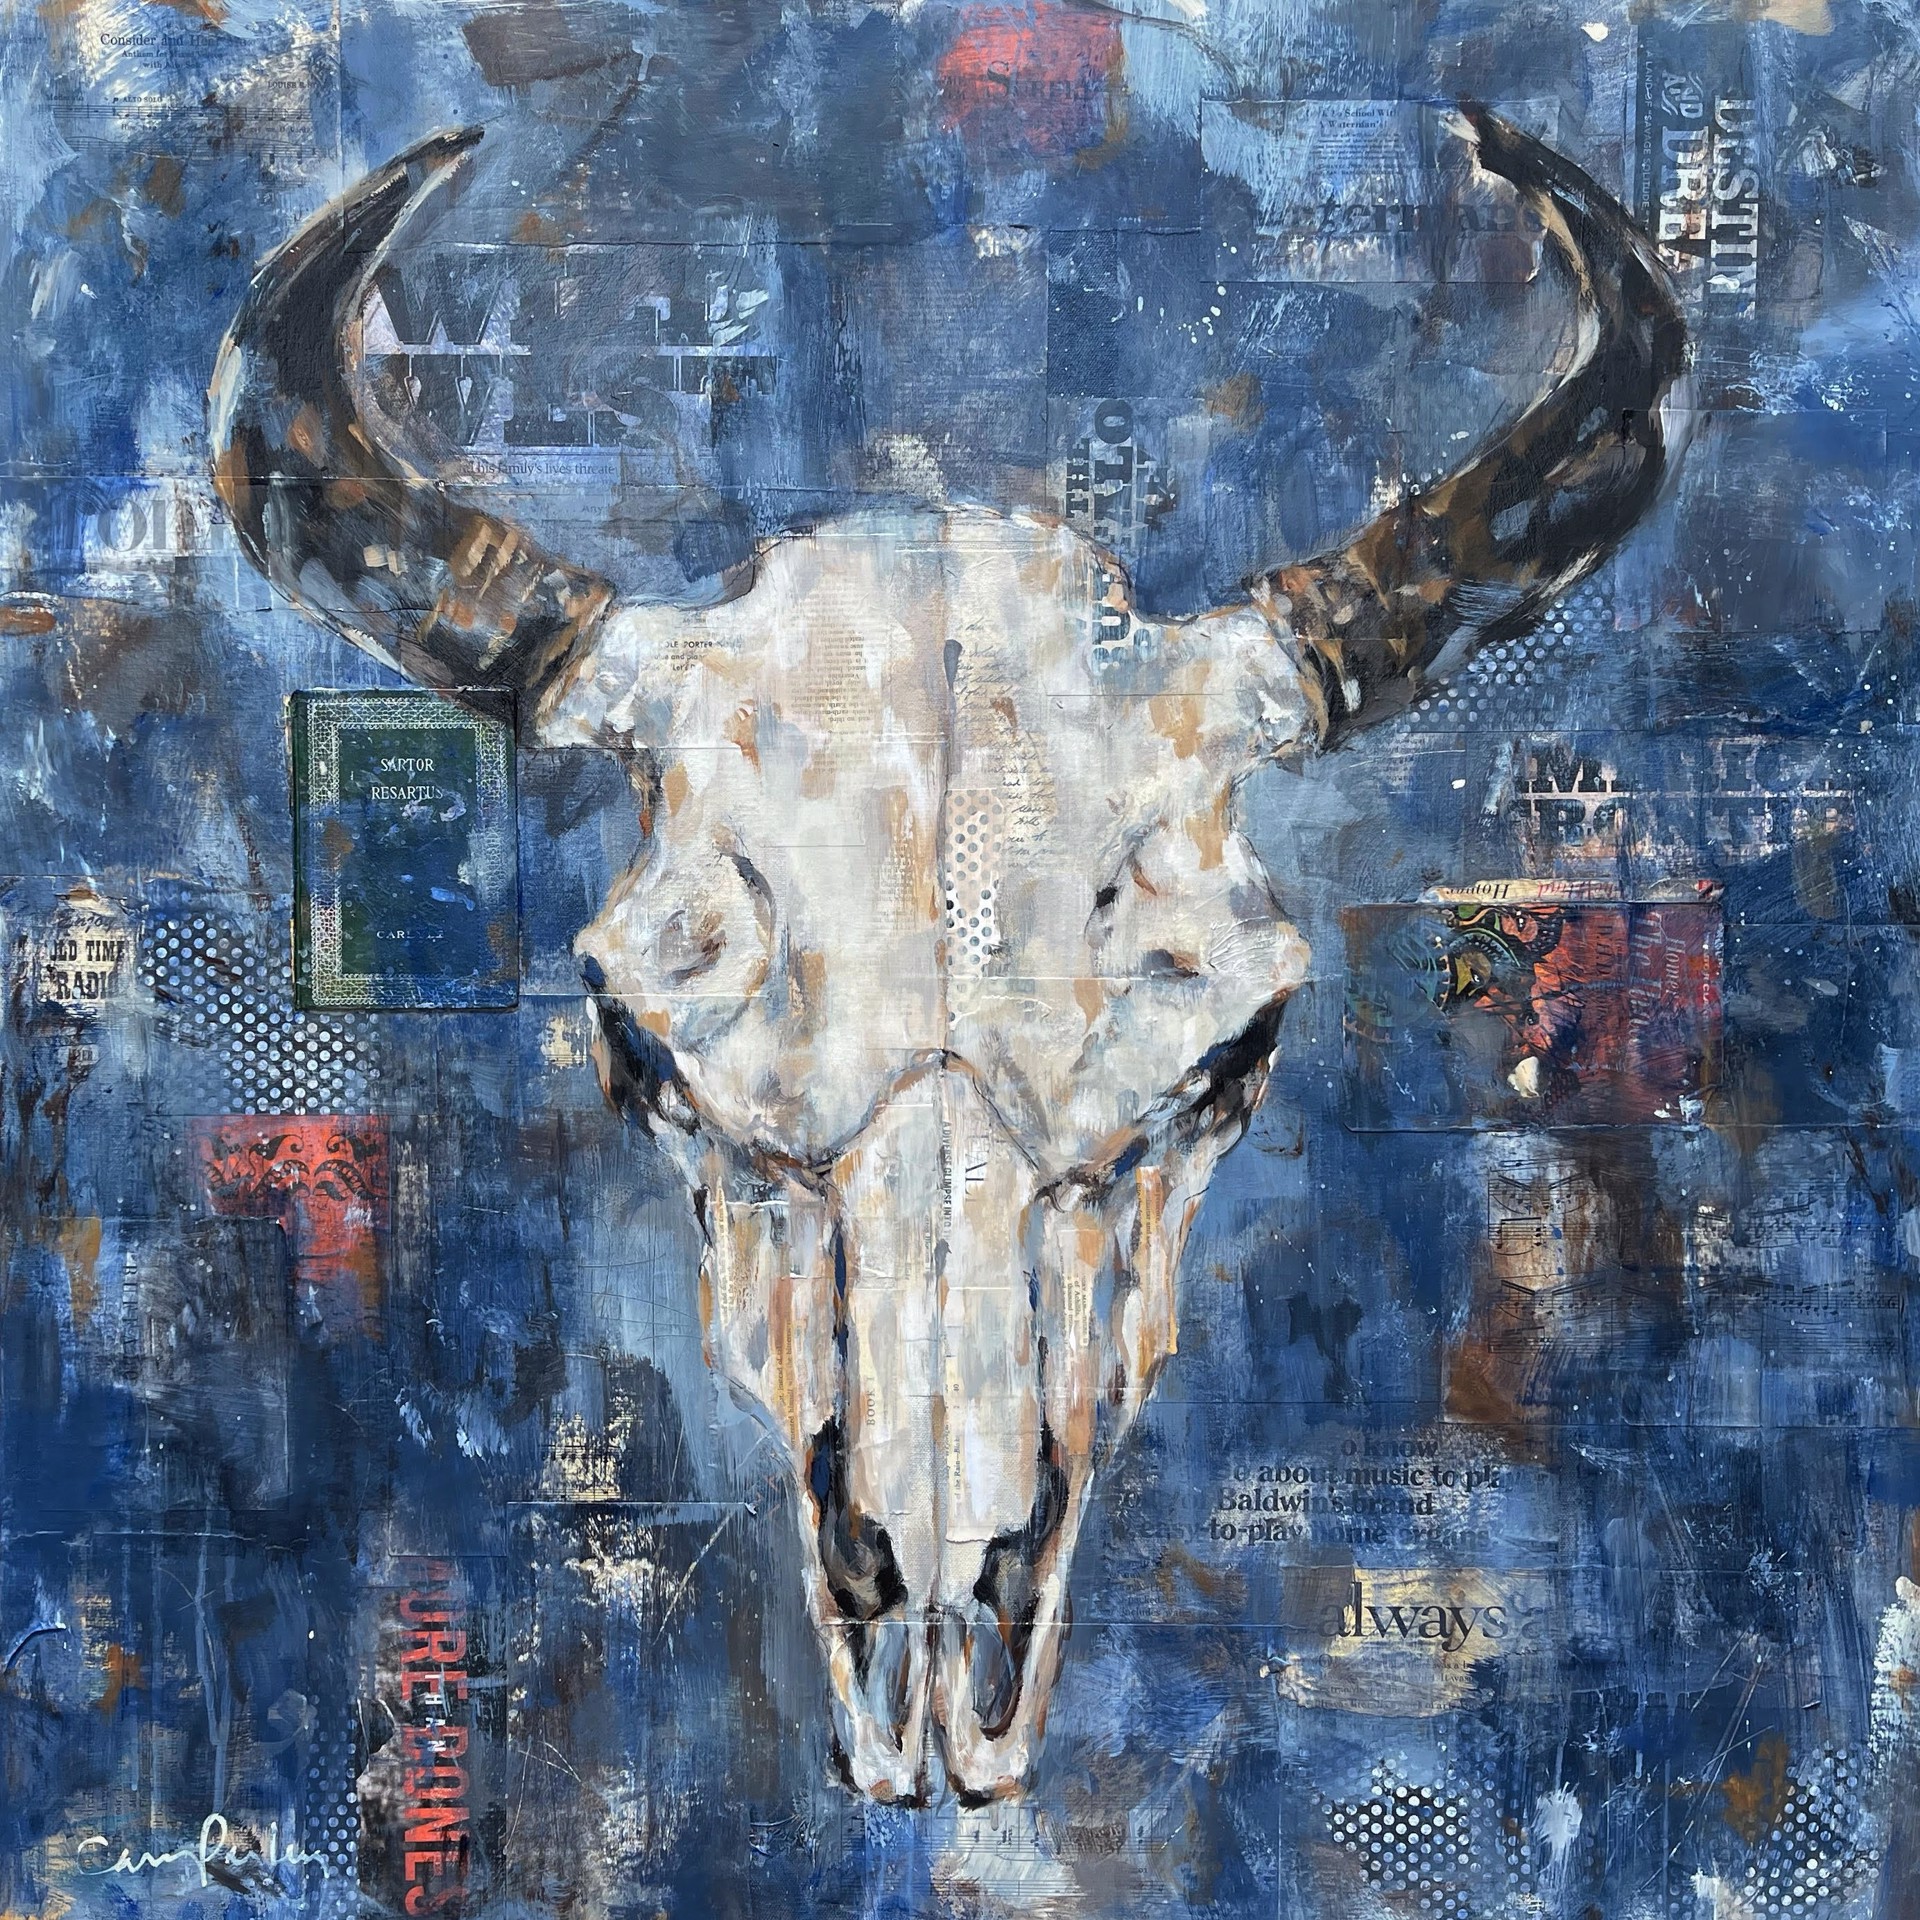 Original Artwork Of A Bison Skull On A Blue Collage Background, By Artist Carrie Penley